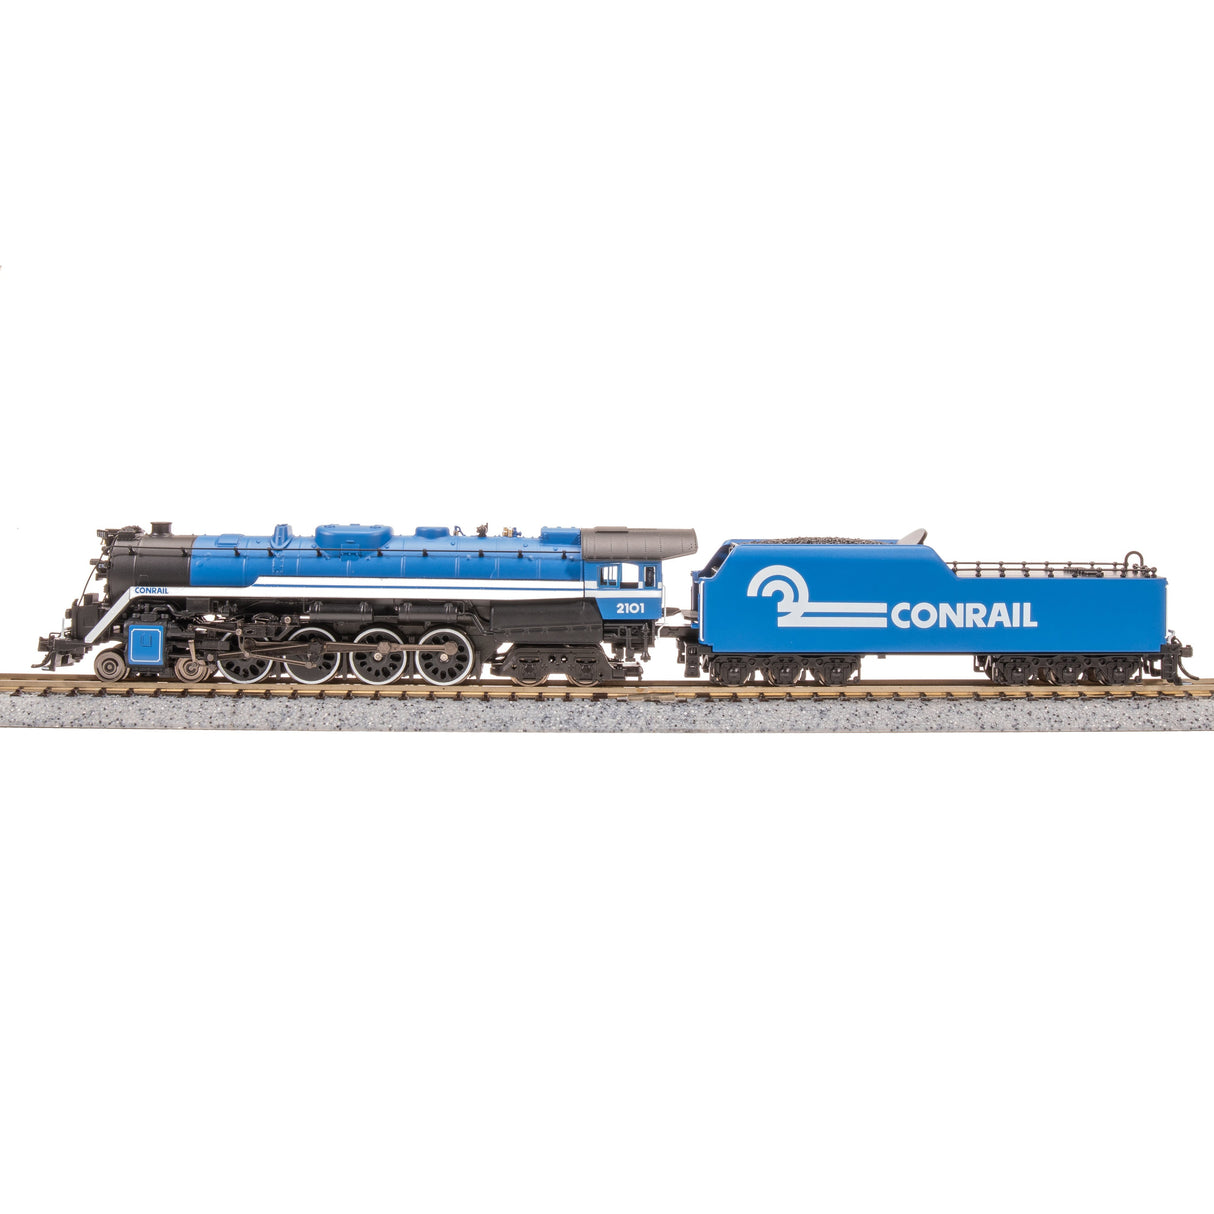 Broadway Limited N Scale Reading T-1 4-8-4 Steam Locomotive CR Steam Southern Pacificecial #2101/blu&wht